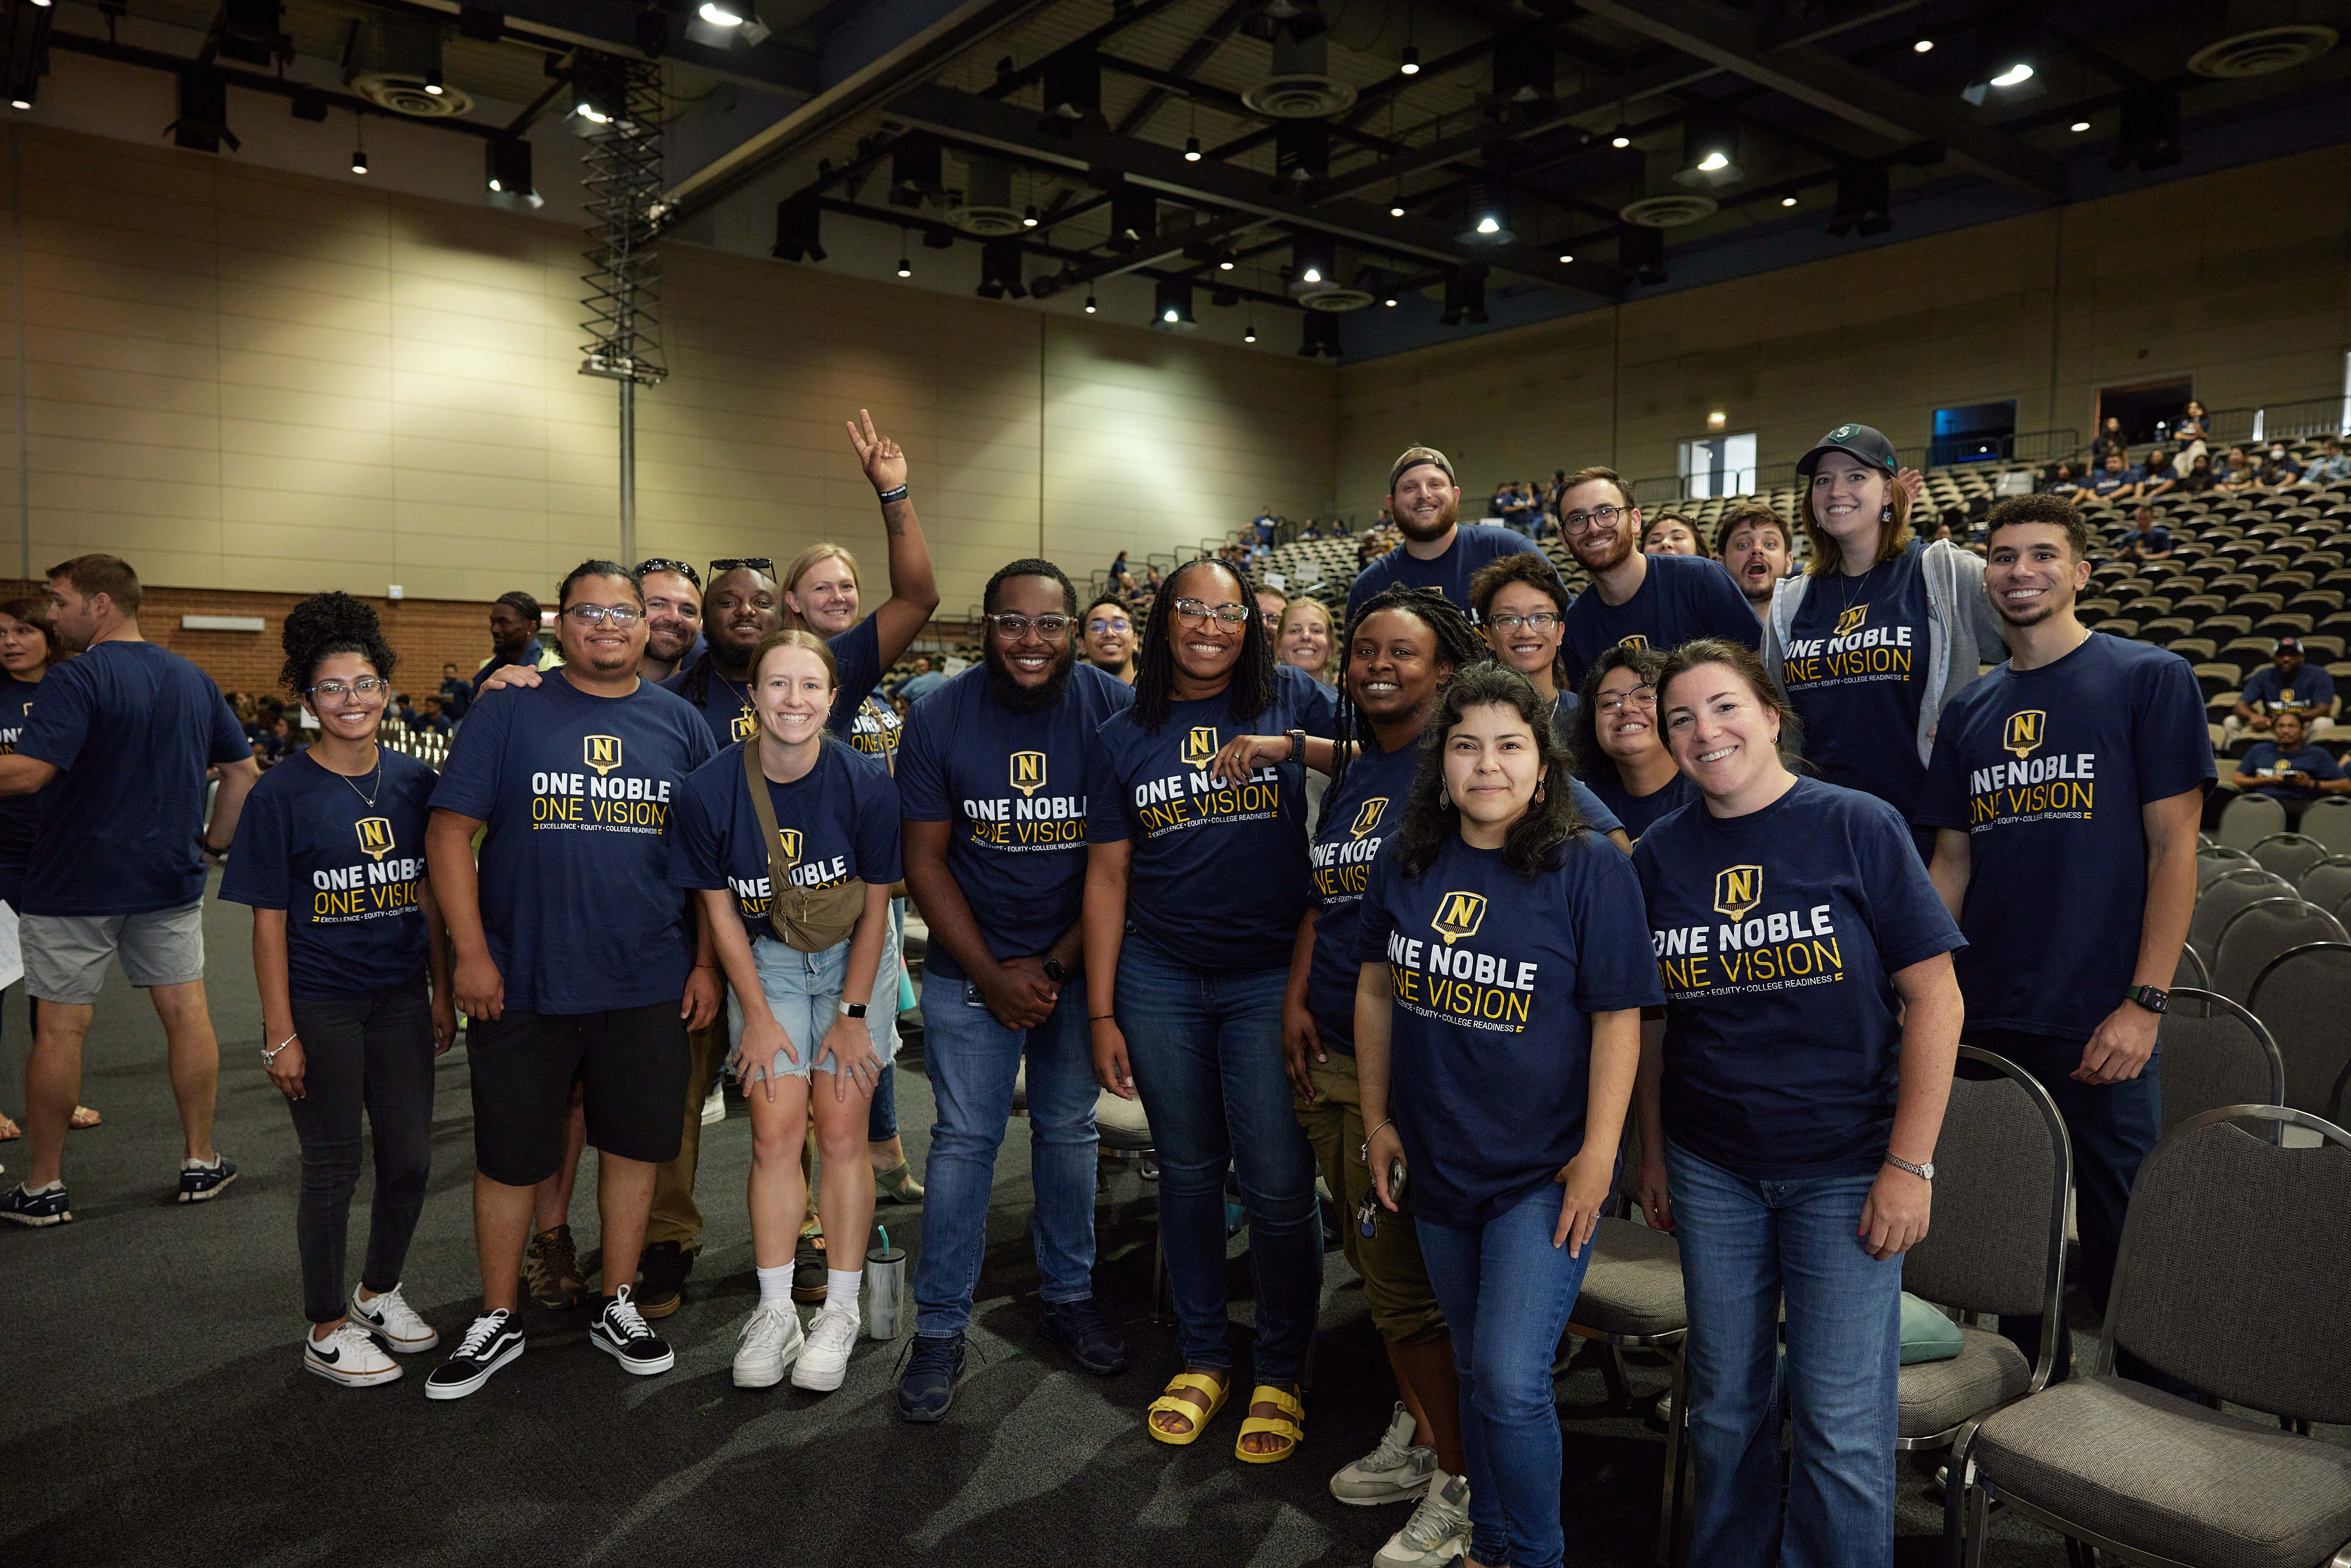 Photo shows a group shot of The Noble Academy staff standing and looking at the camera, smiling. They are in a big auditorium at UIC with hundreds of chairs behind them and bright lights above them. They are all wearing dark blue shirts that have the Noble Schools logo on them and say "One Noble, One Vision: Excellence, Equity, and College Readiness".